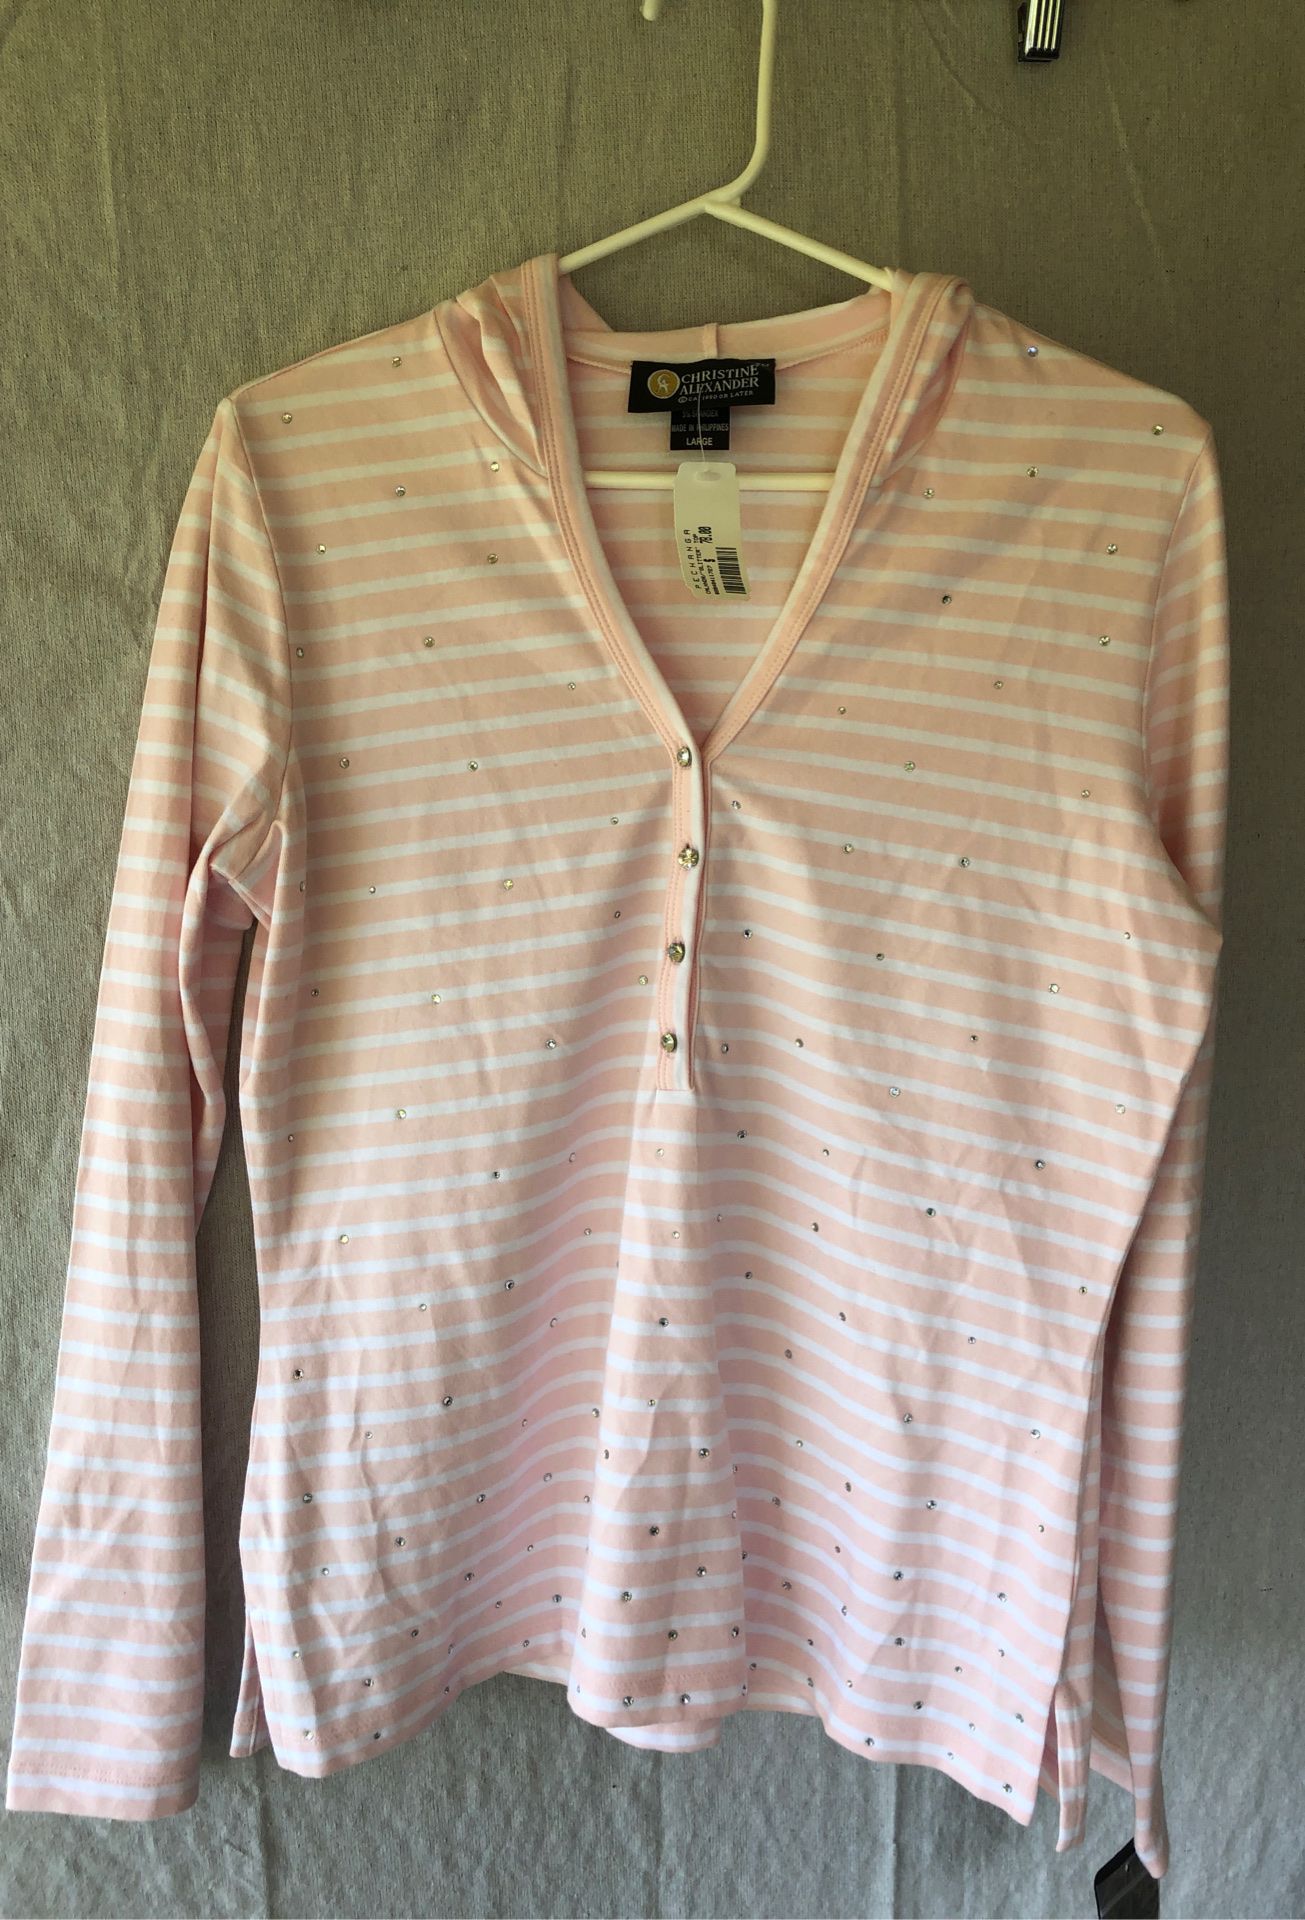 Christine Alexander bling Swarovski crystal hoodie top shirt pink and white size large new with tags